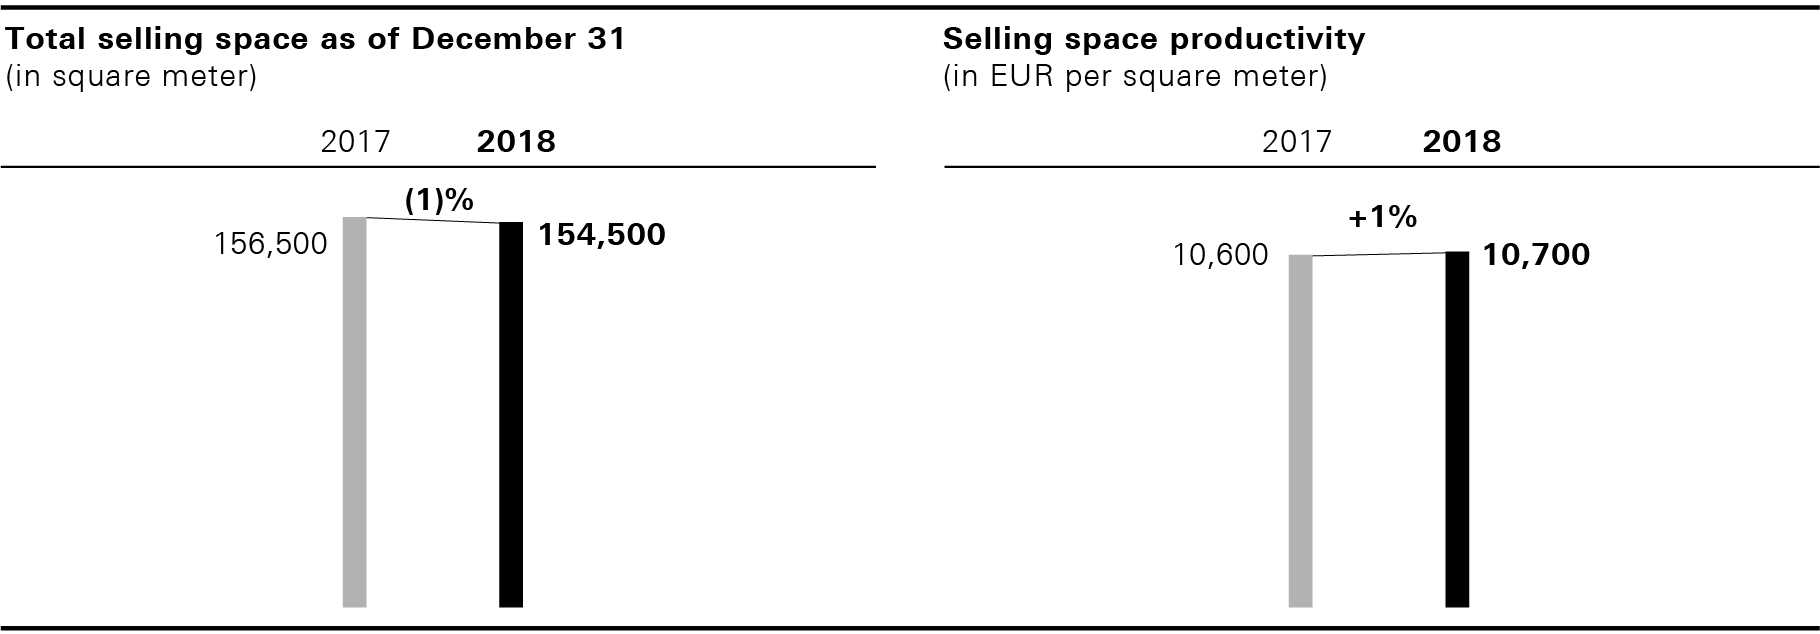 Total selling space as of December 31 and Selling space productivity (bar chart)